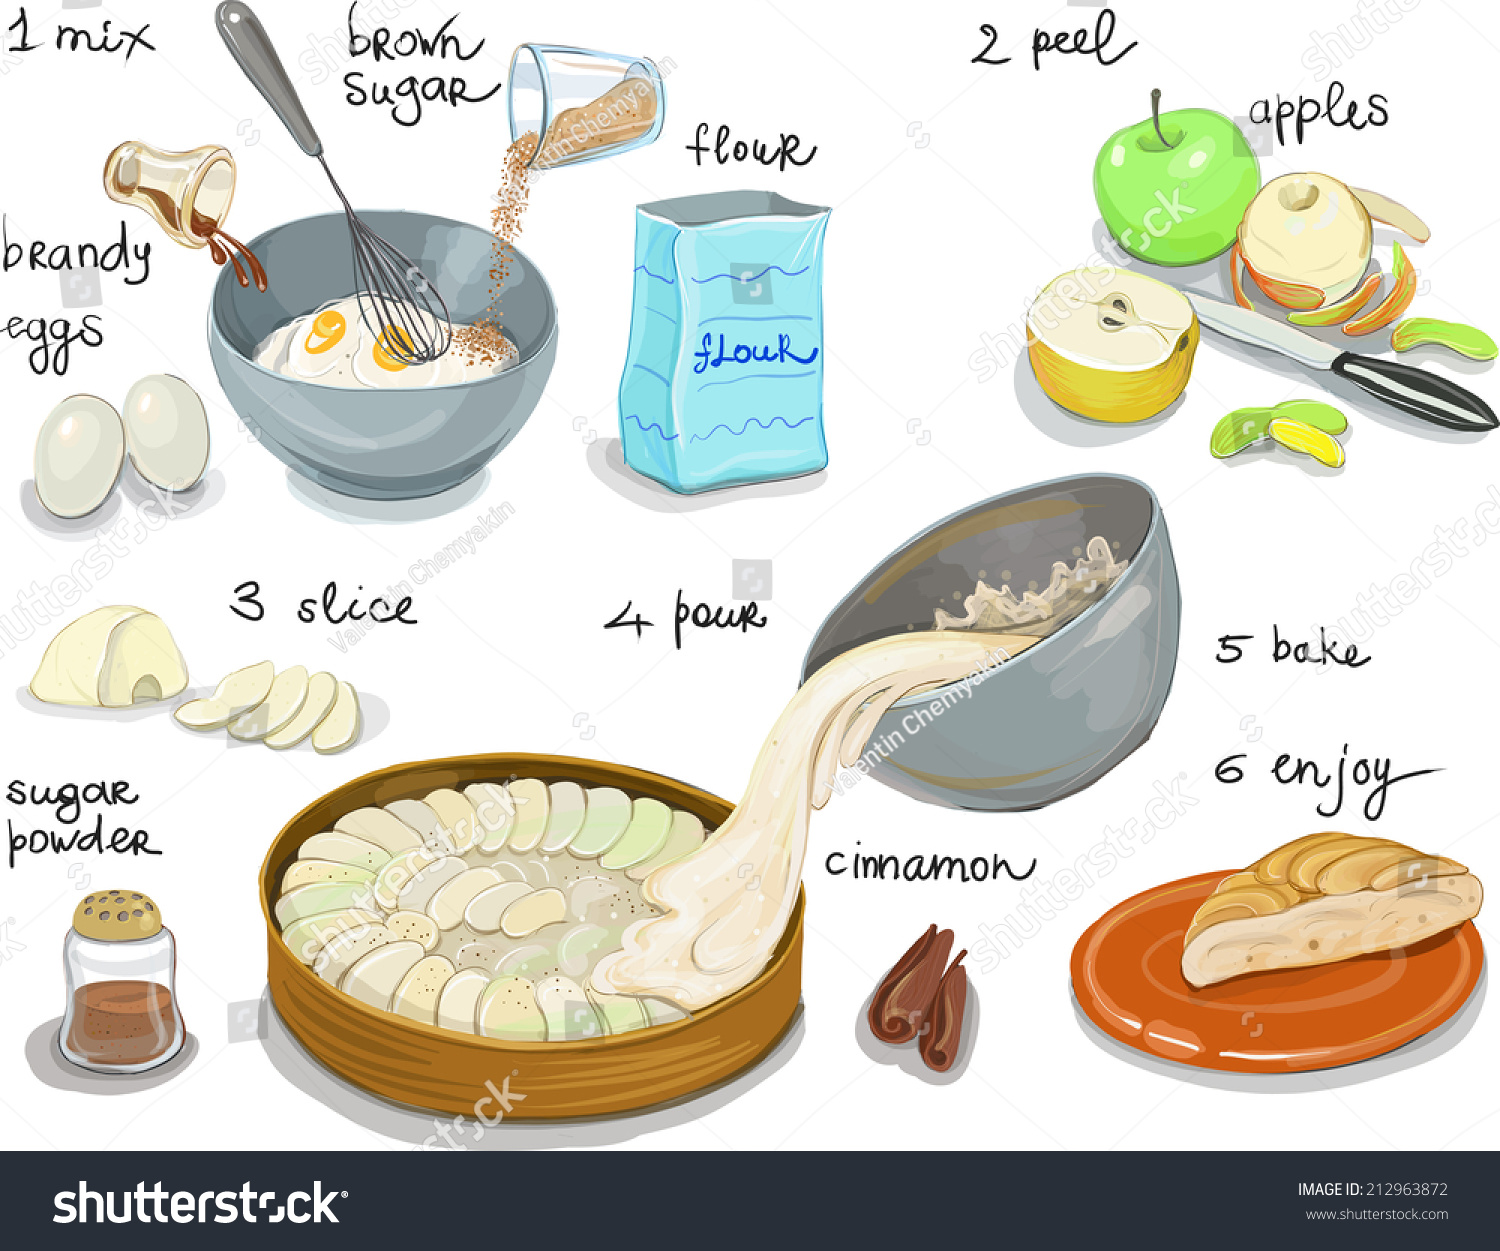 SVG of Apple pie. Step by step recipe in pictures make a cake with fresh apples, eggs, flour, sugar. Homemade pie, dessert, sweet dish.   svg